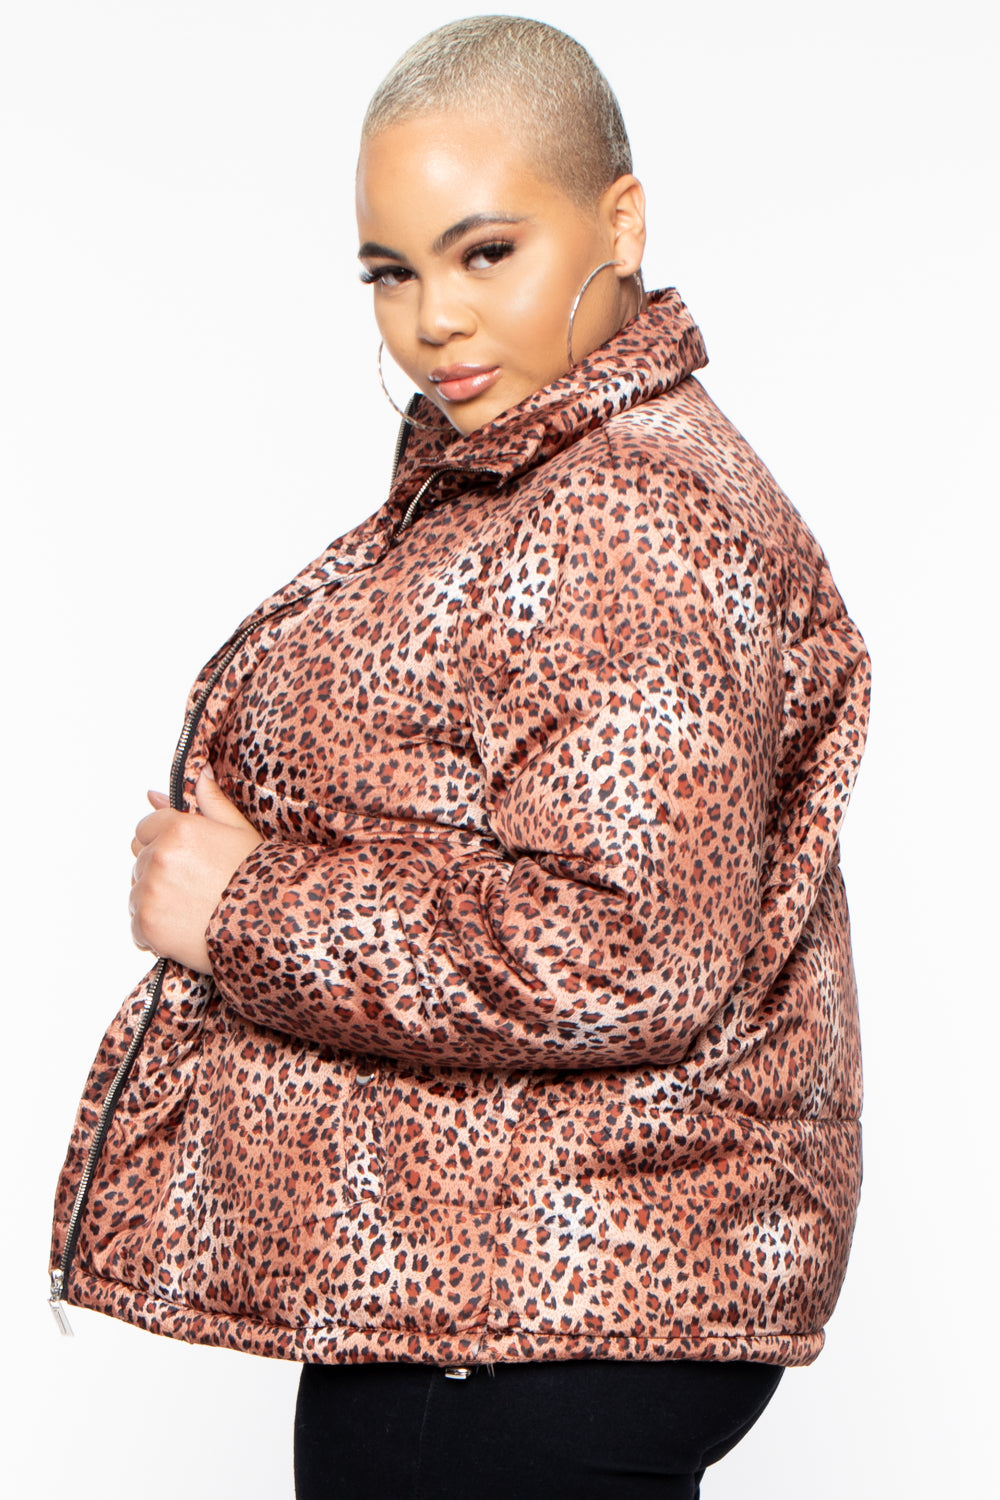 Jou Jou Jackets And Outerwear Plus Size Leopard Print Puffer Coat - Brown